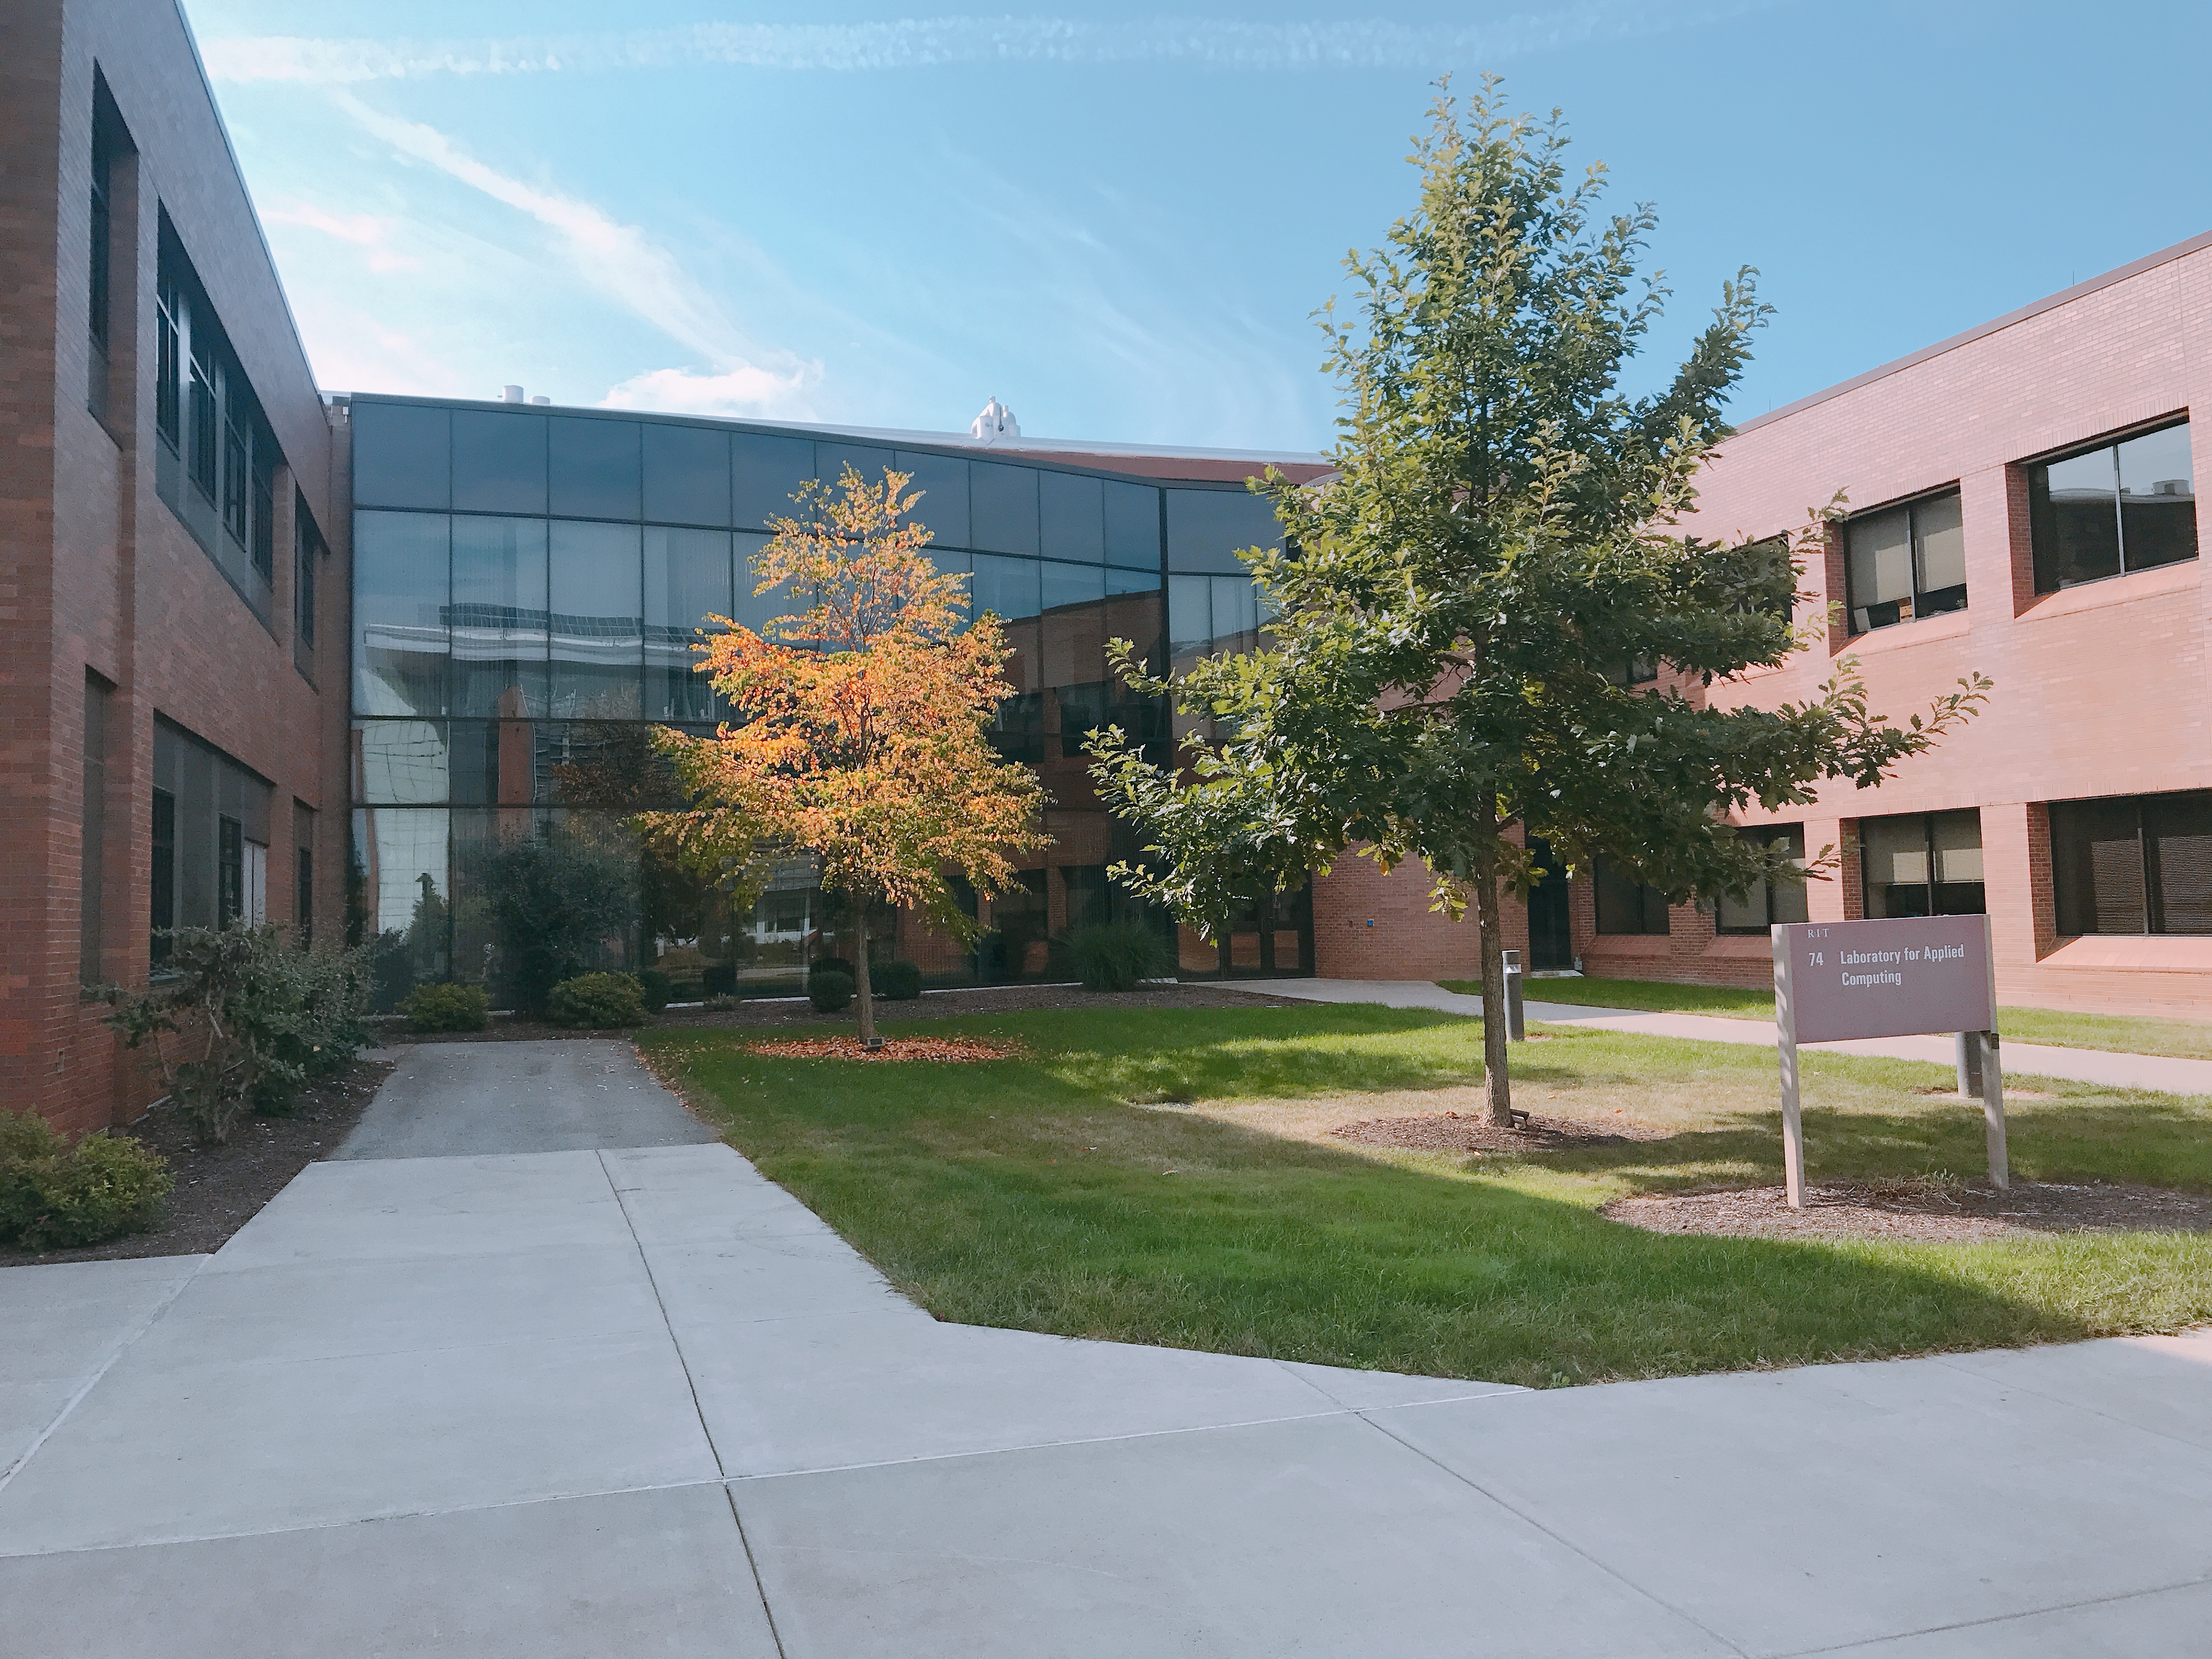 The Aspire is located on the 2nd floor of RIT's Building 74, the Laboratory for Applied Computing